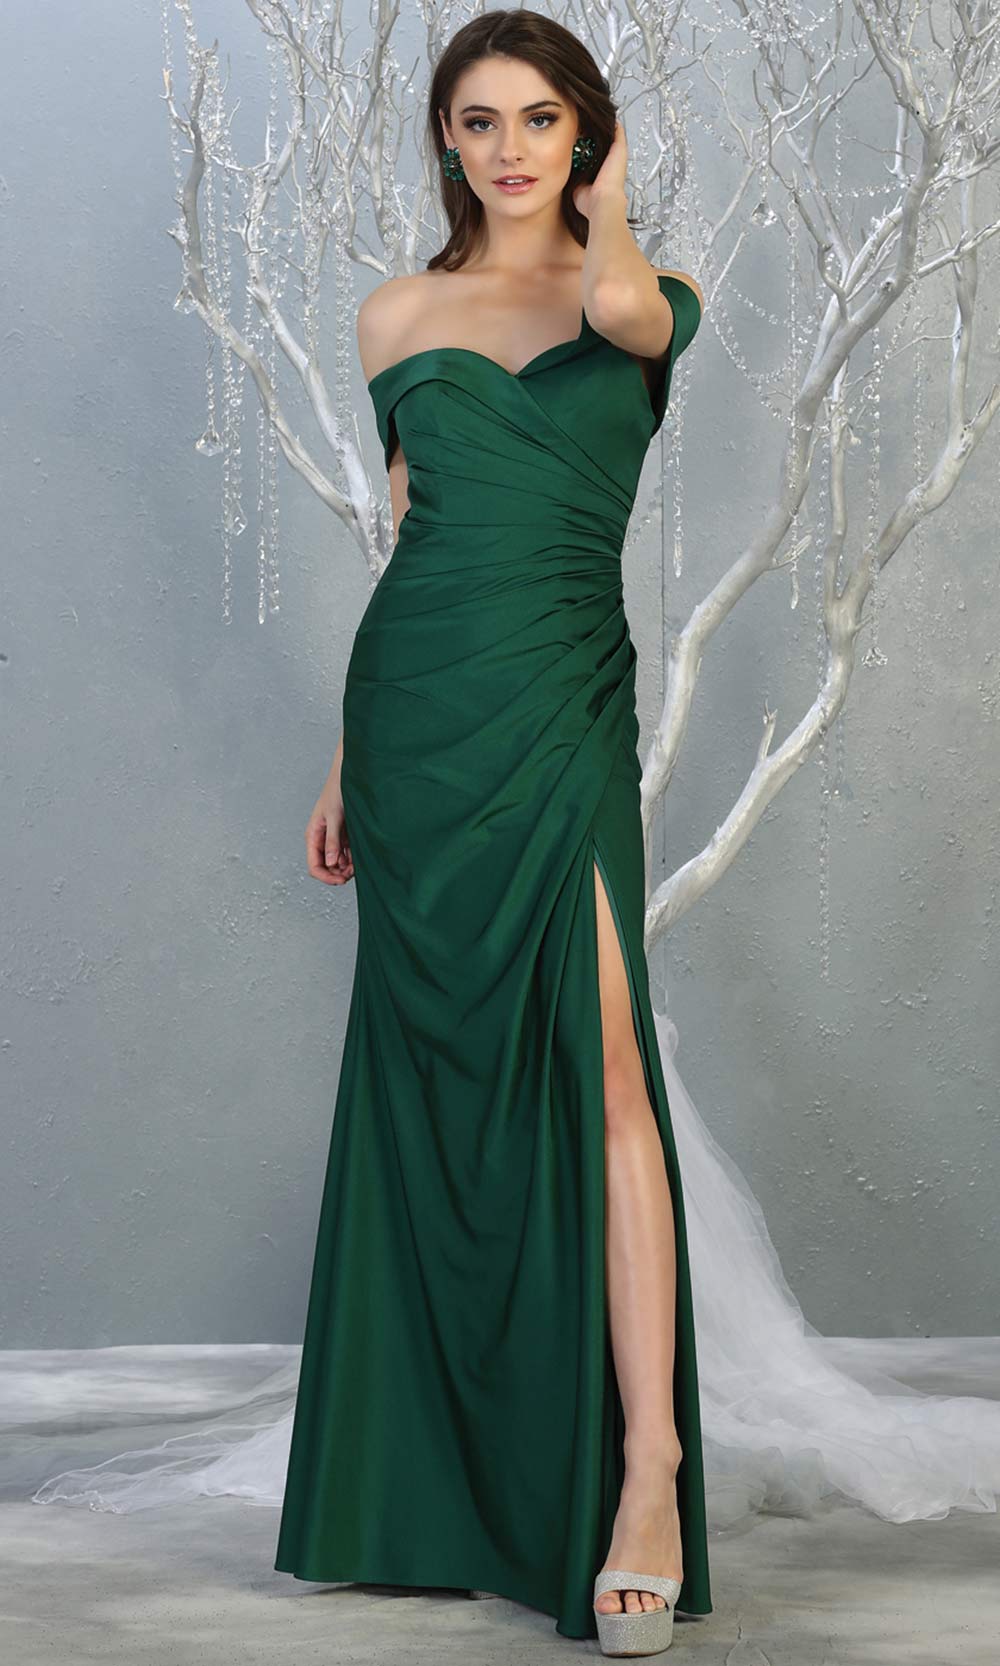 Mayqueen MQ1825 long hunter green off shoulder fitted bridesmaid dress w/high slit. Full length sleek & sexy gown is perfect for enagagement/e-shoot dress, formal wedding guest, indowestern gown, evening party dress, prom, bridesmaid. Plus sizes avail.jpg